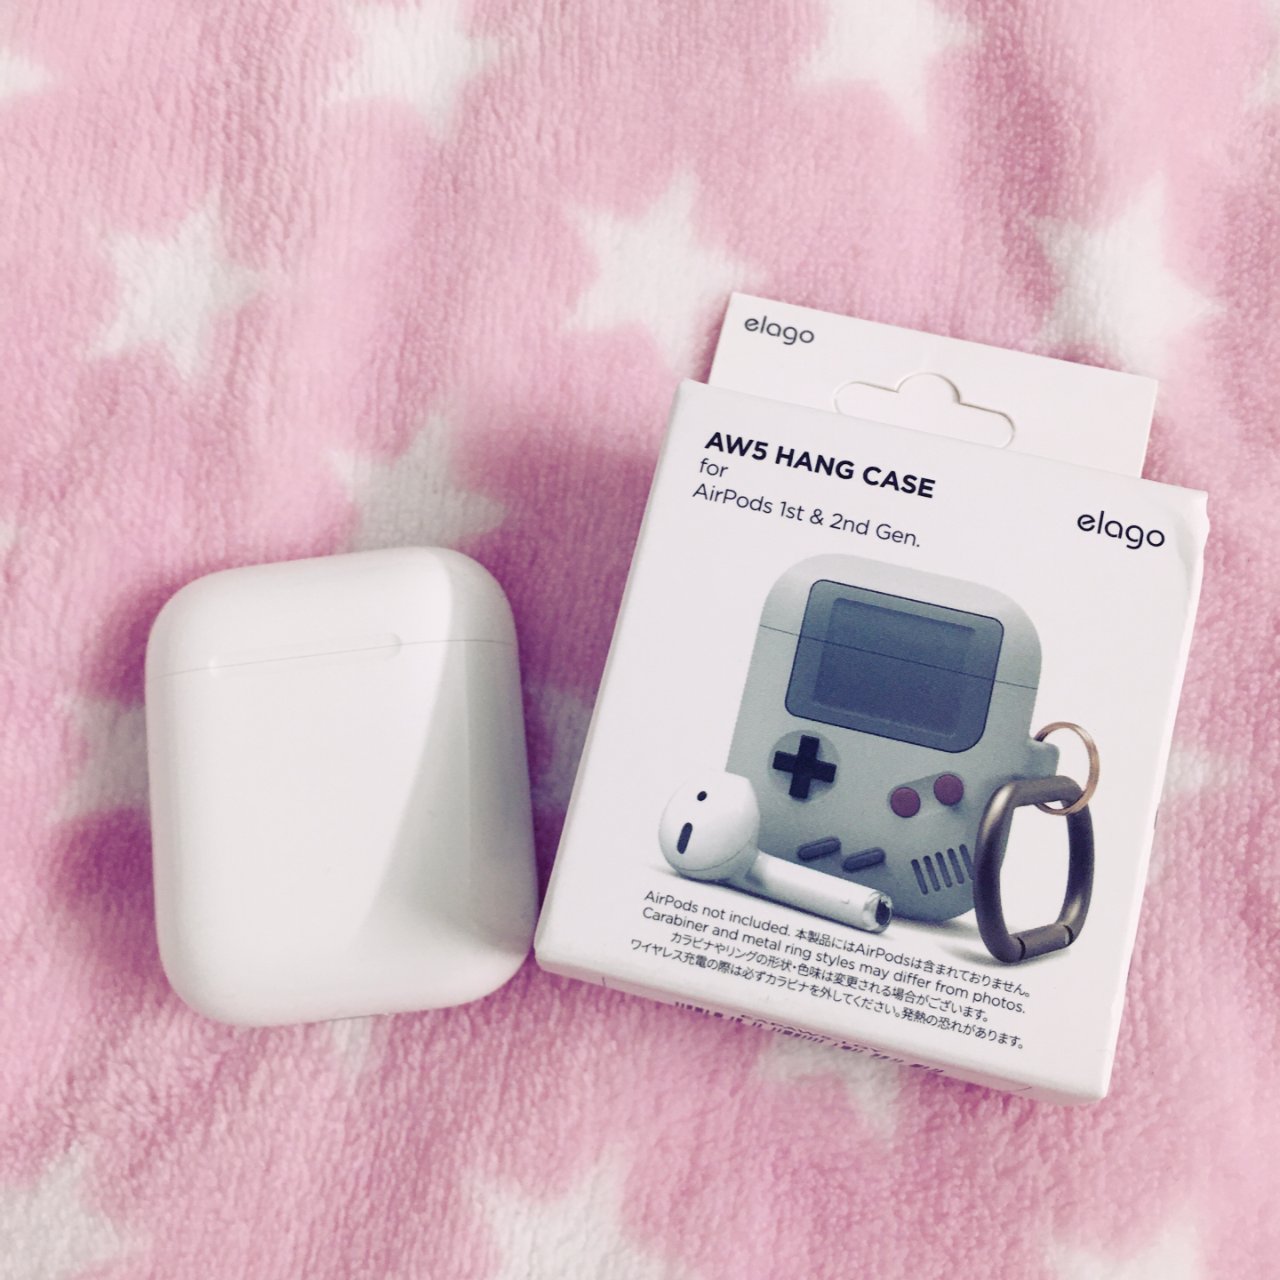 AirPods,Amazon 亚马逊,Airpods case,game boy